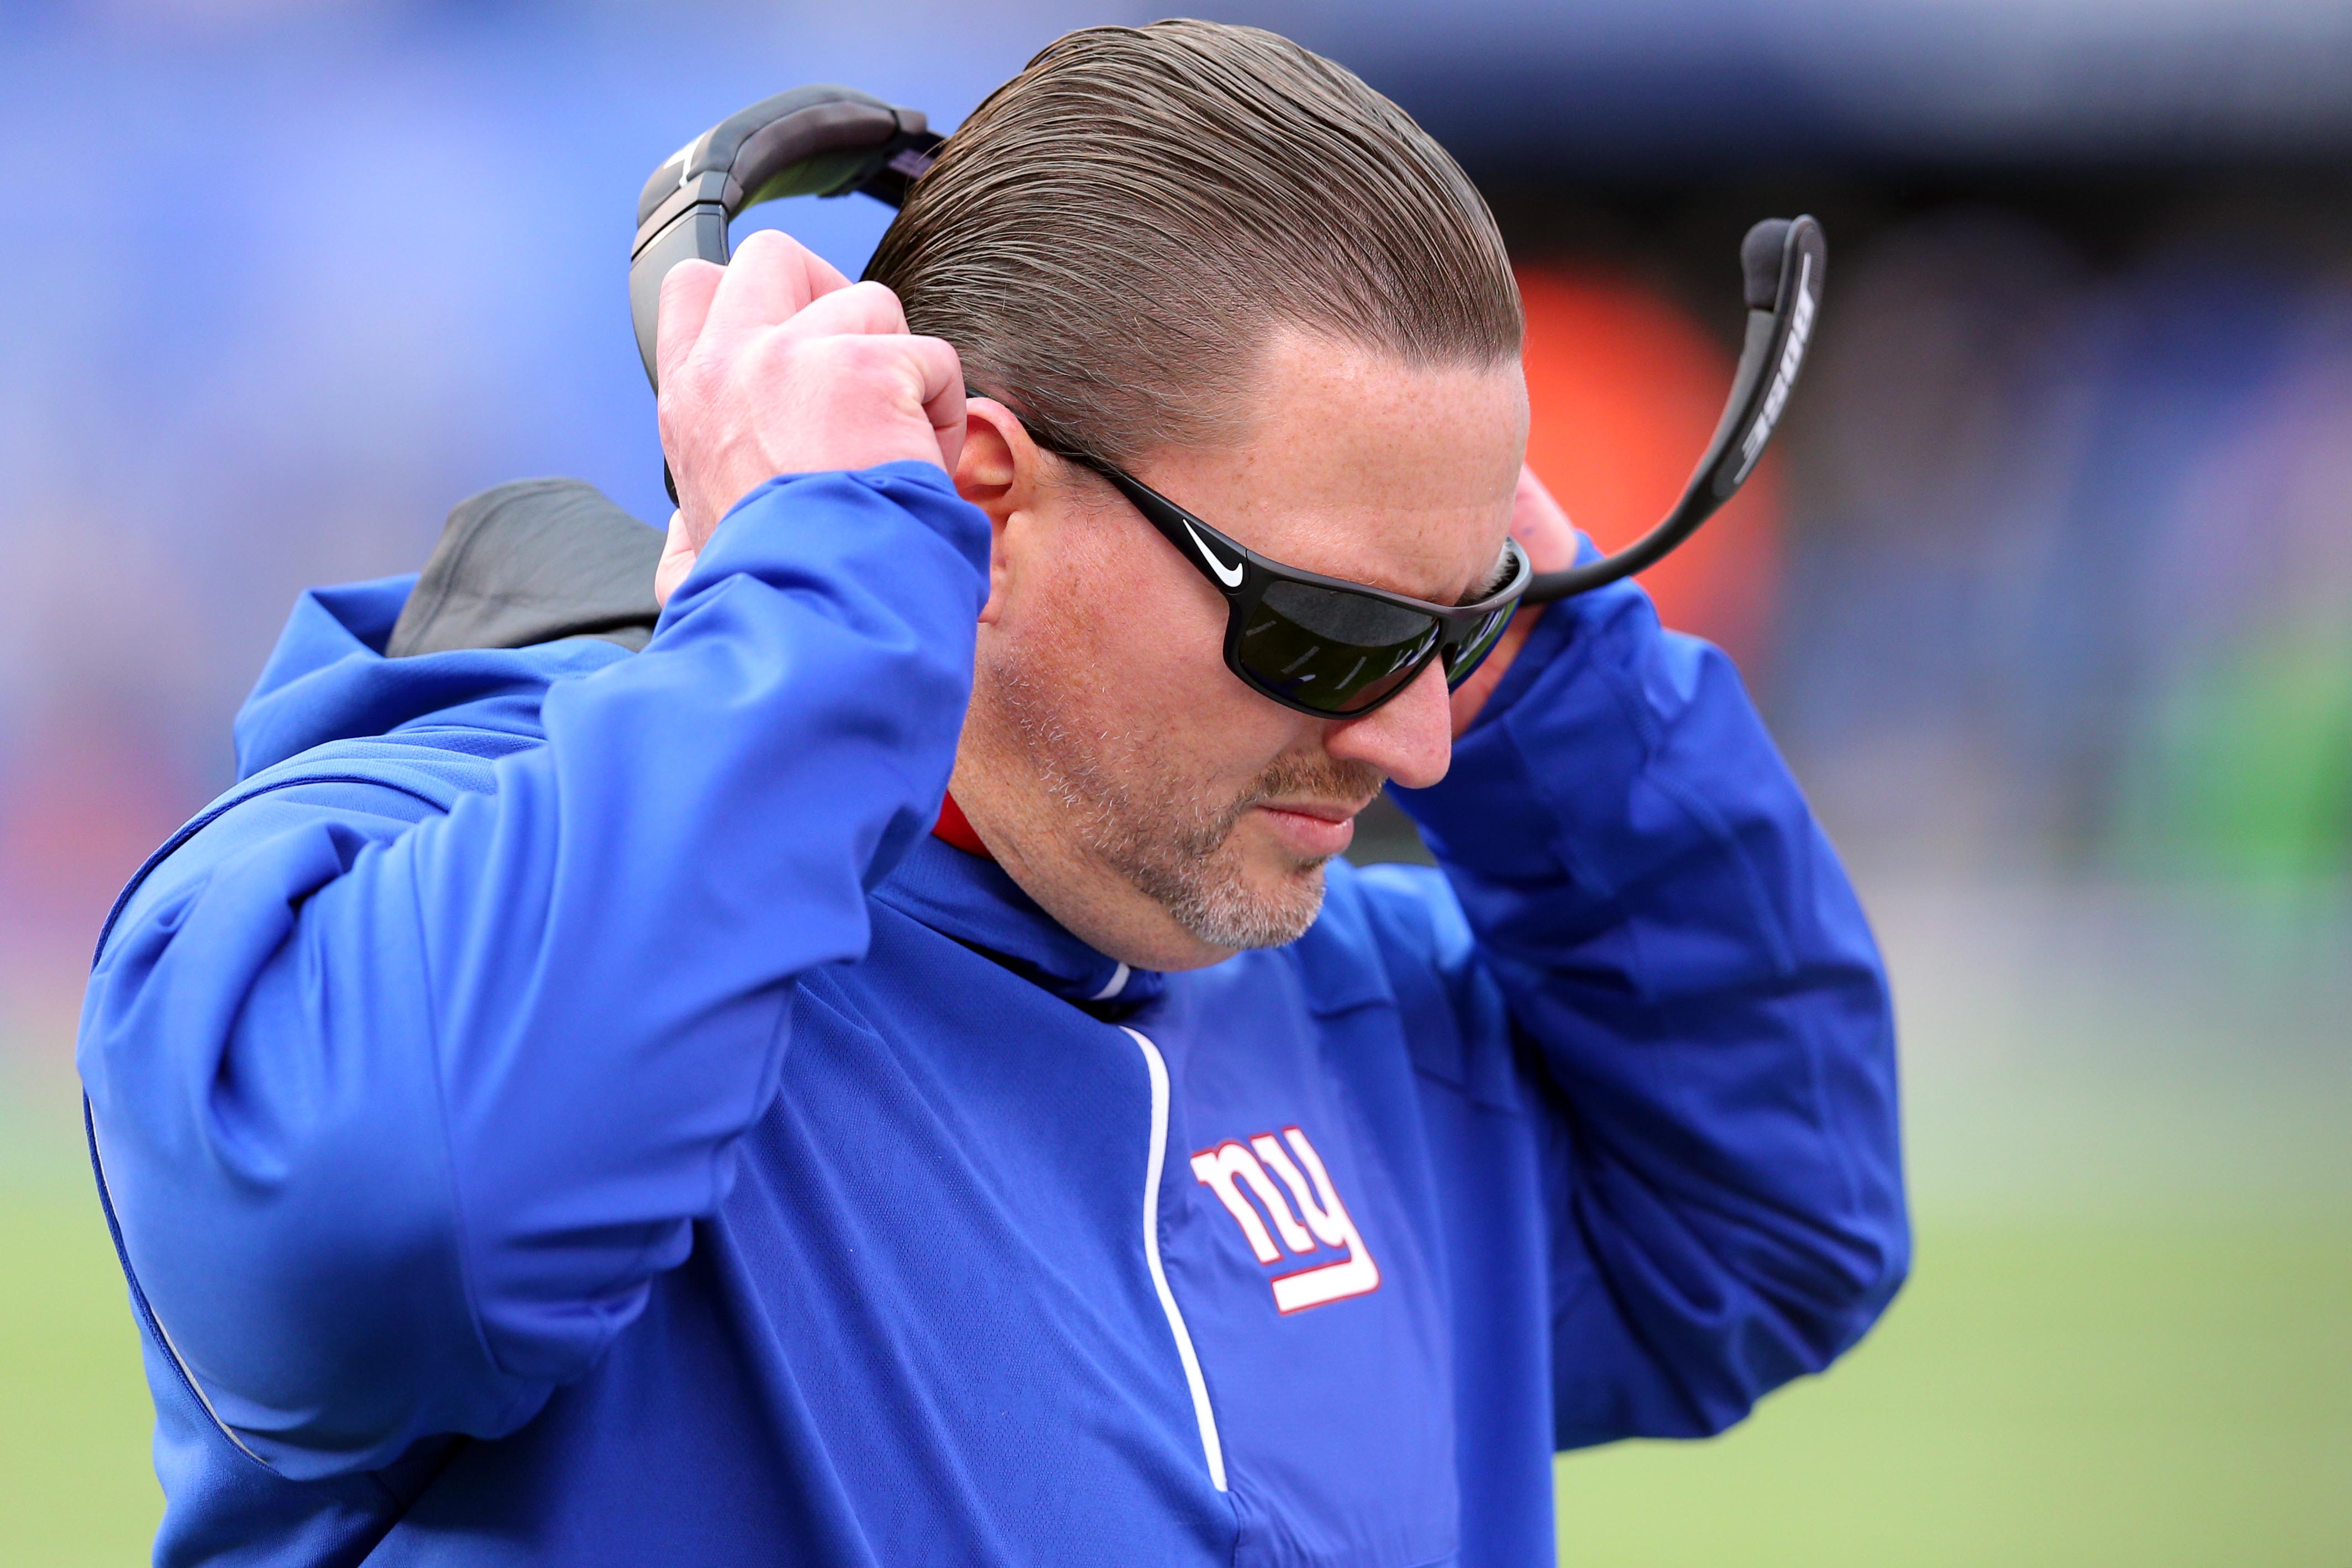 Ben McAdoo receives 4-year deal from Giants to be their new head